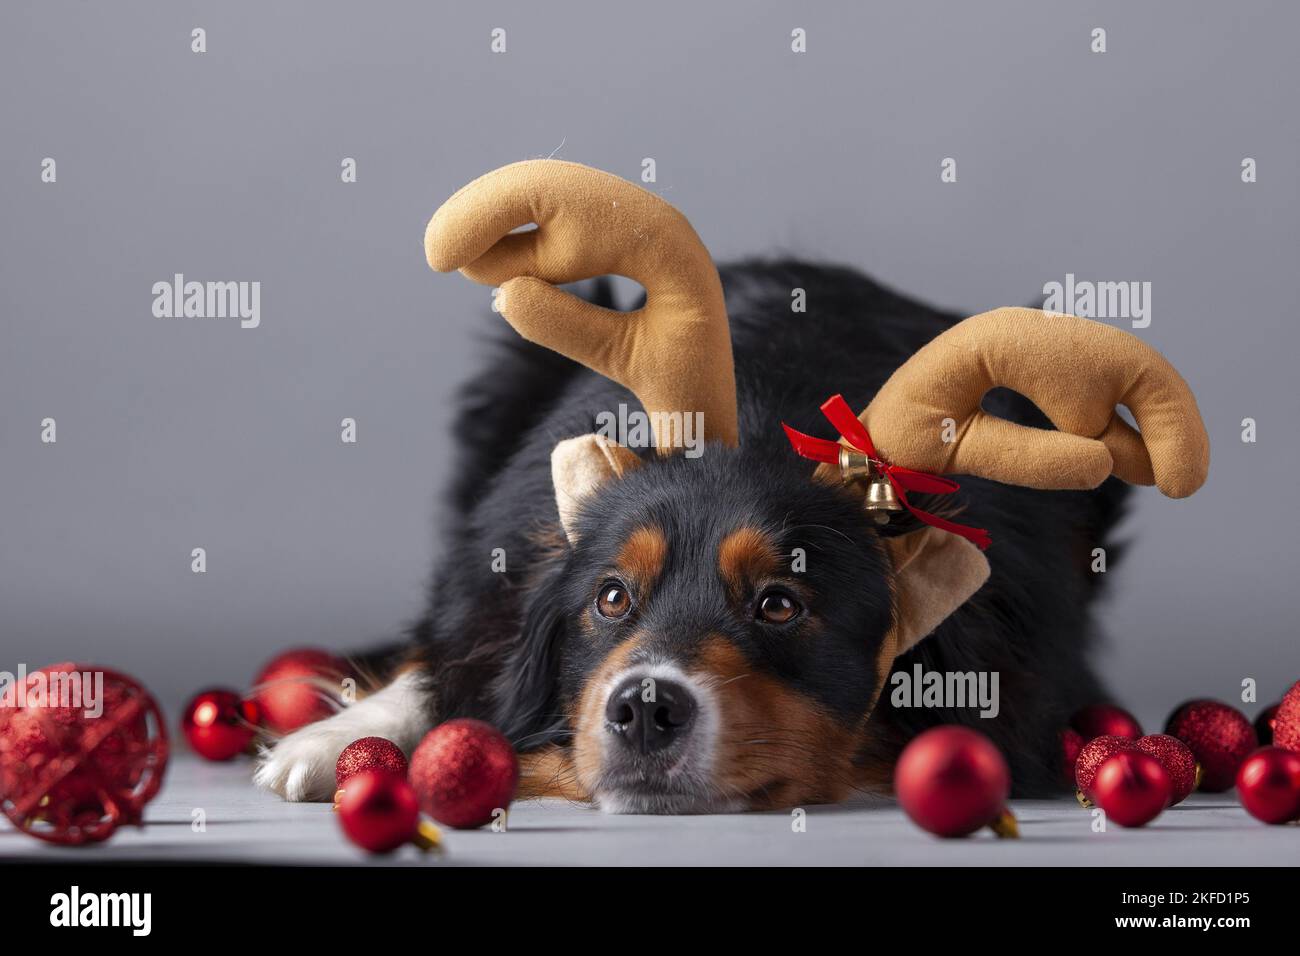 Miniature American Shepherd with Christmas baubles Stock Photo